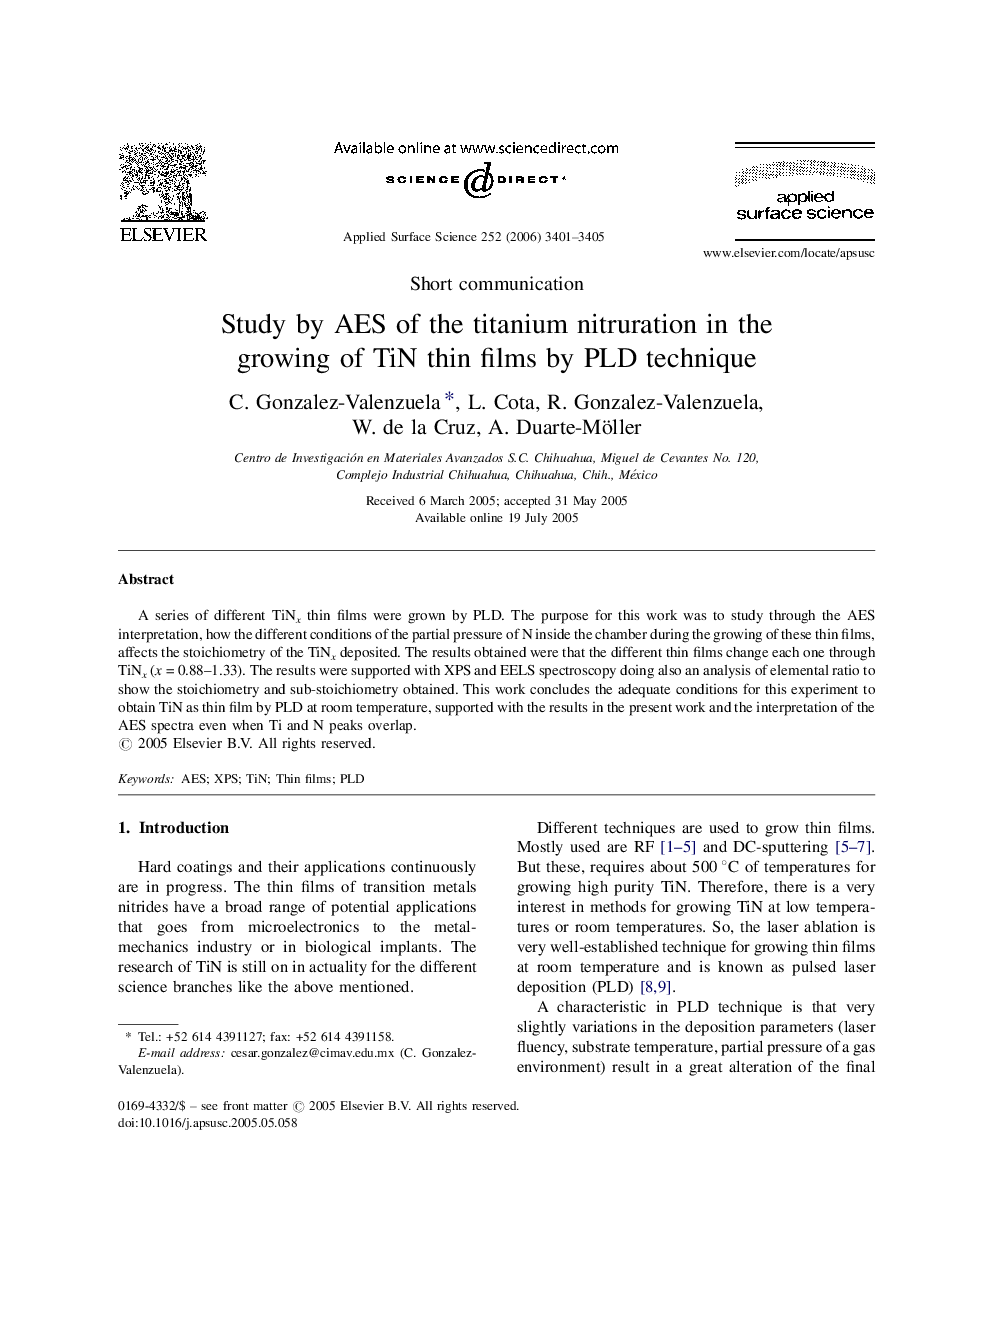 Study by AES of the titanium nitruration in the growing of TiN thin films by PLD technique